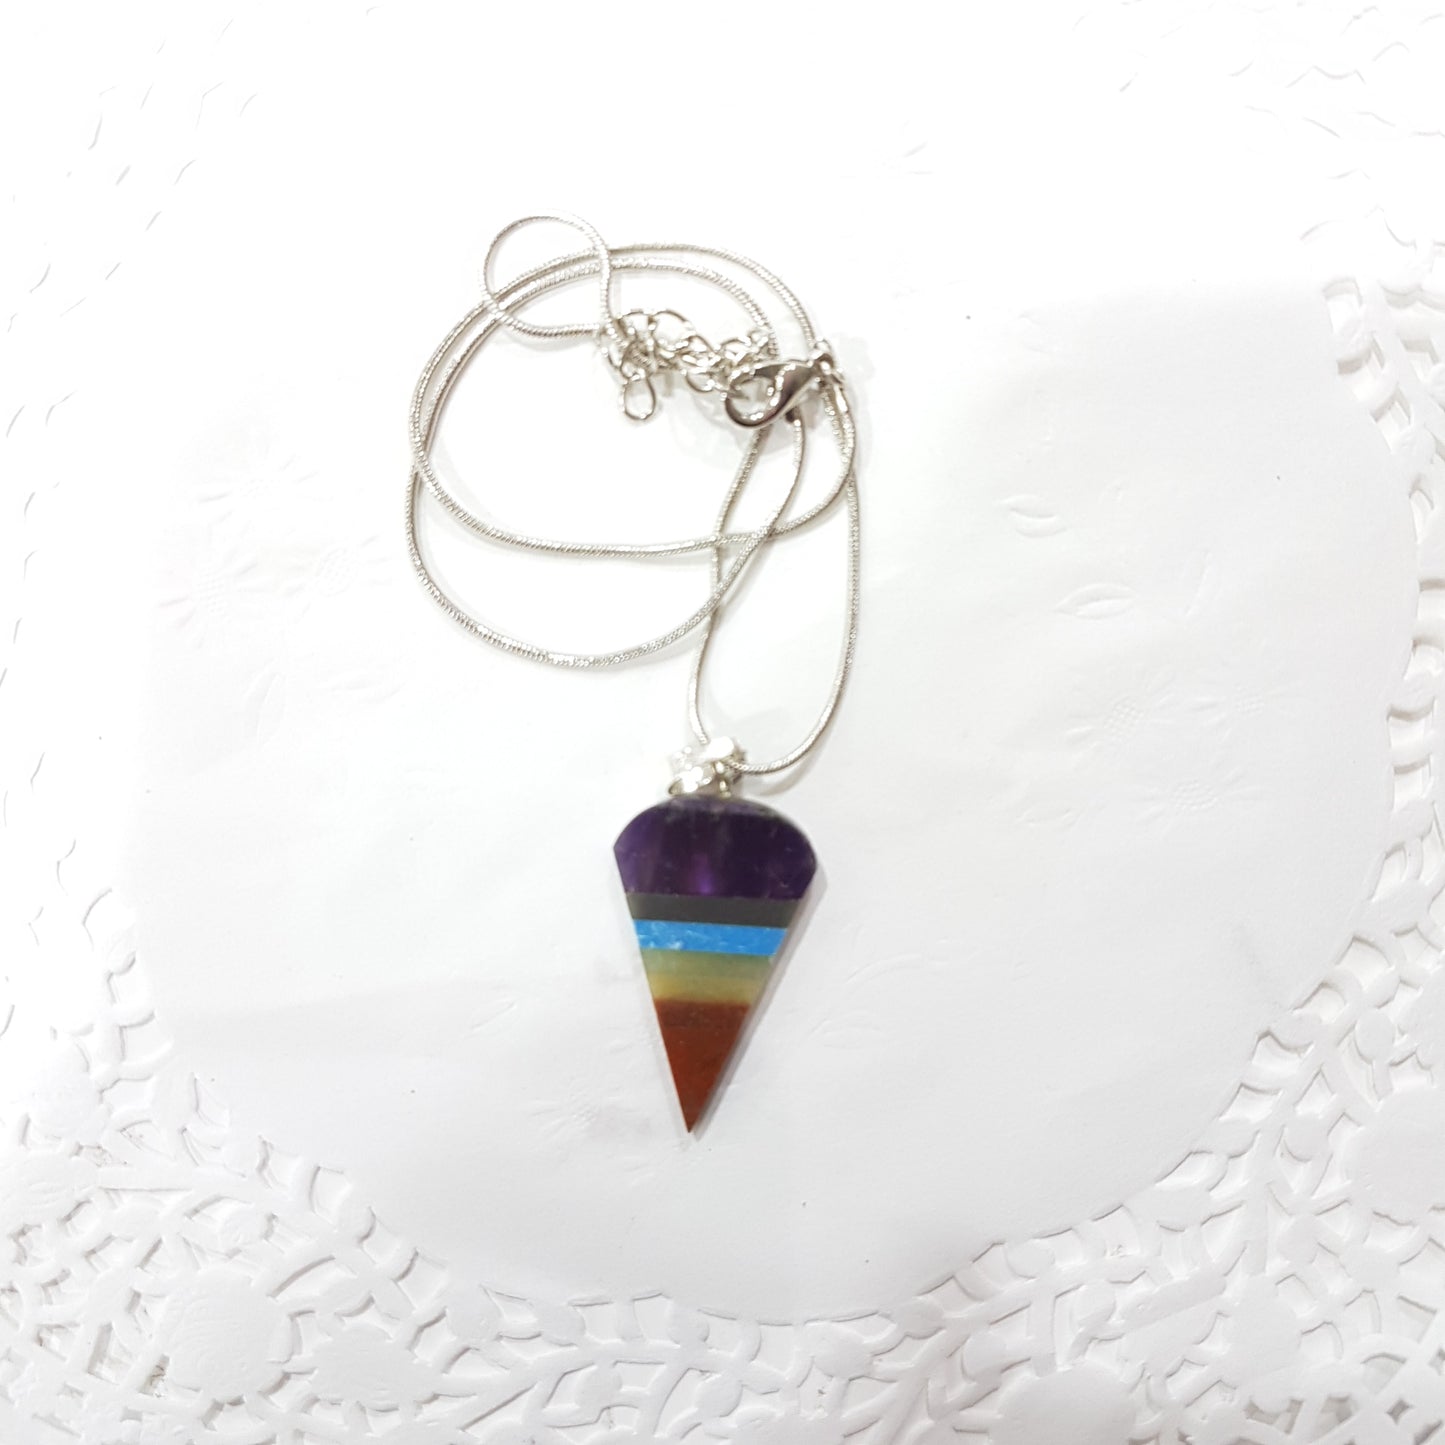 Chakra Gemstone Necklace - Pointed Drop